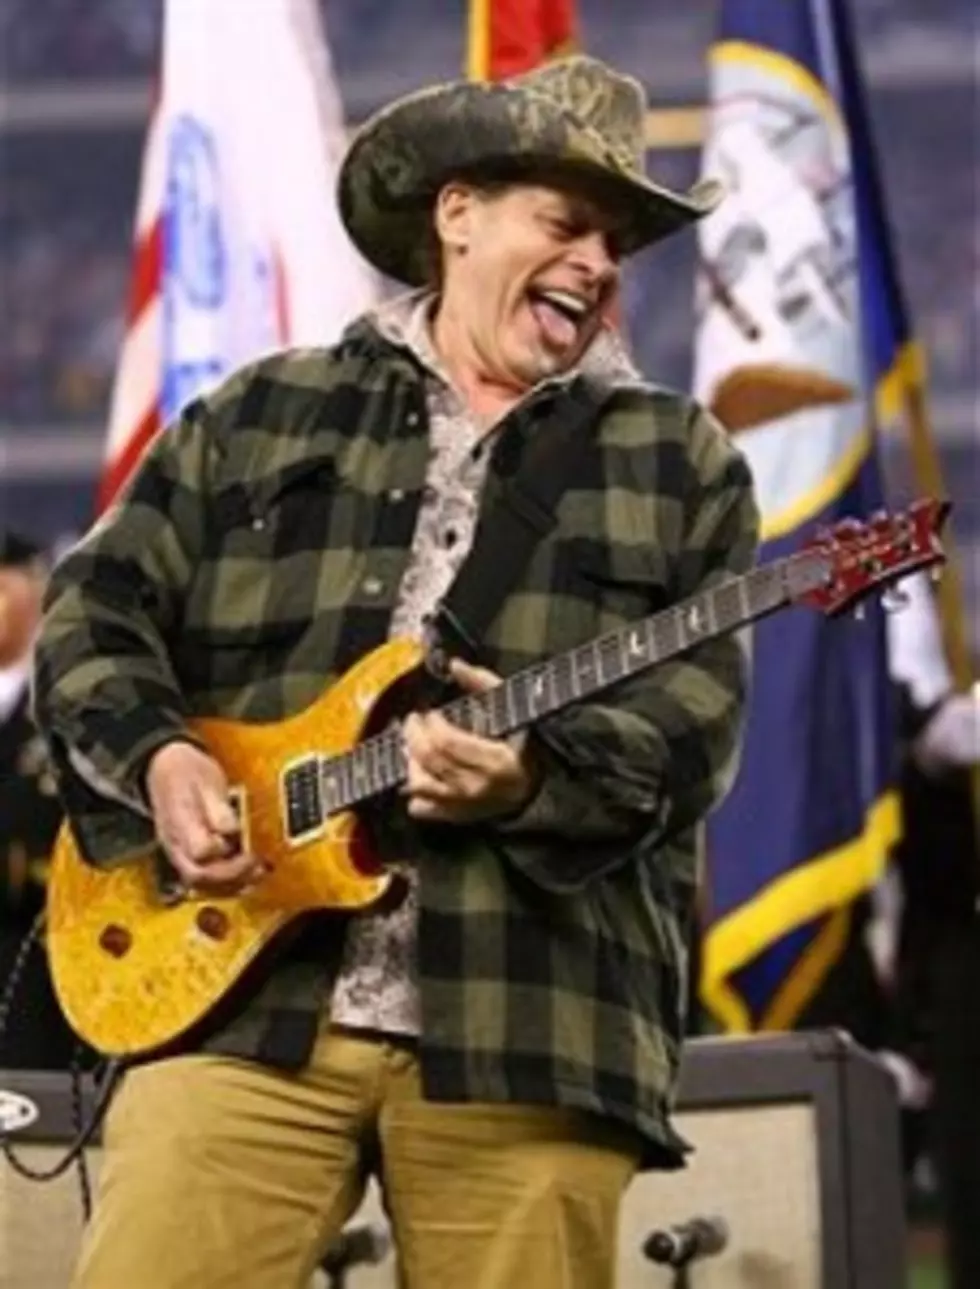 Ted Nugent Is A Palin Fan